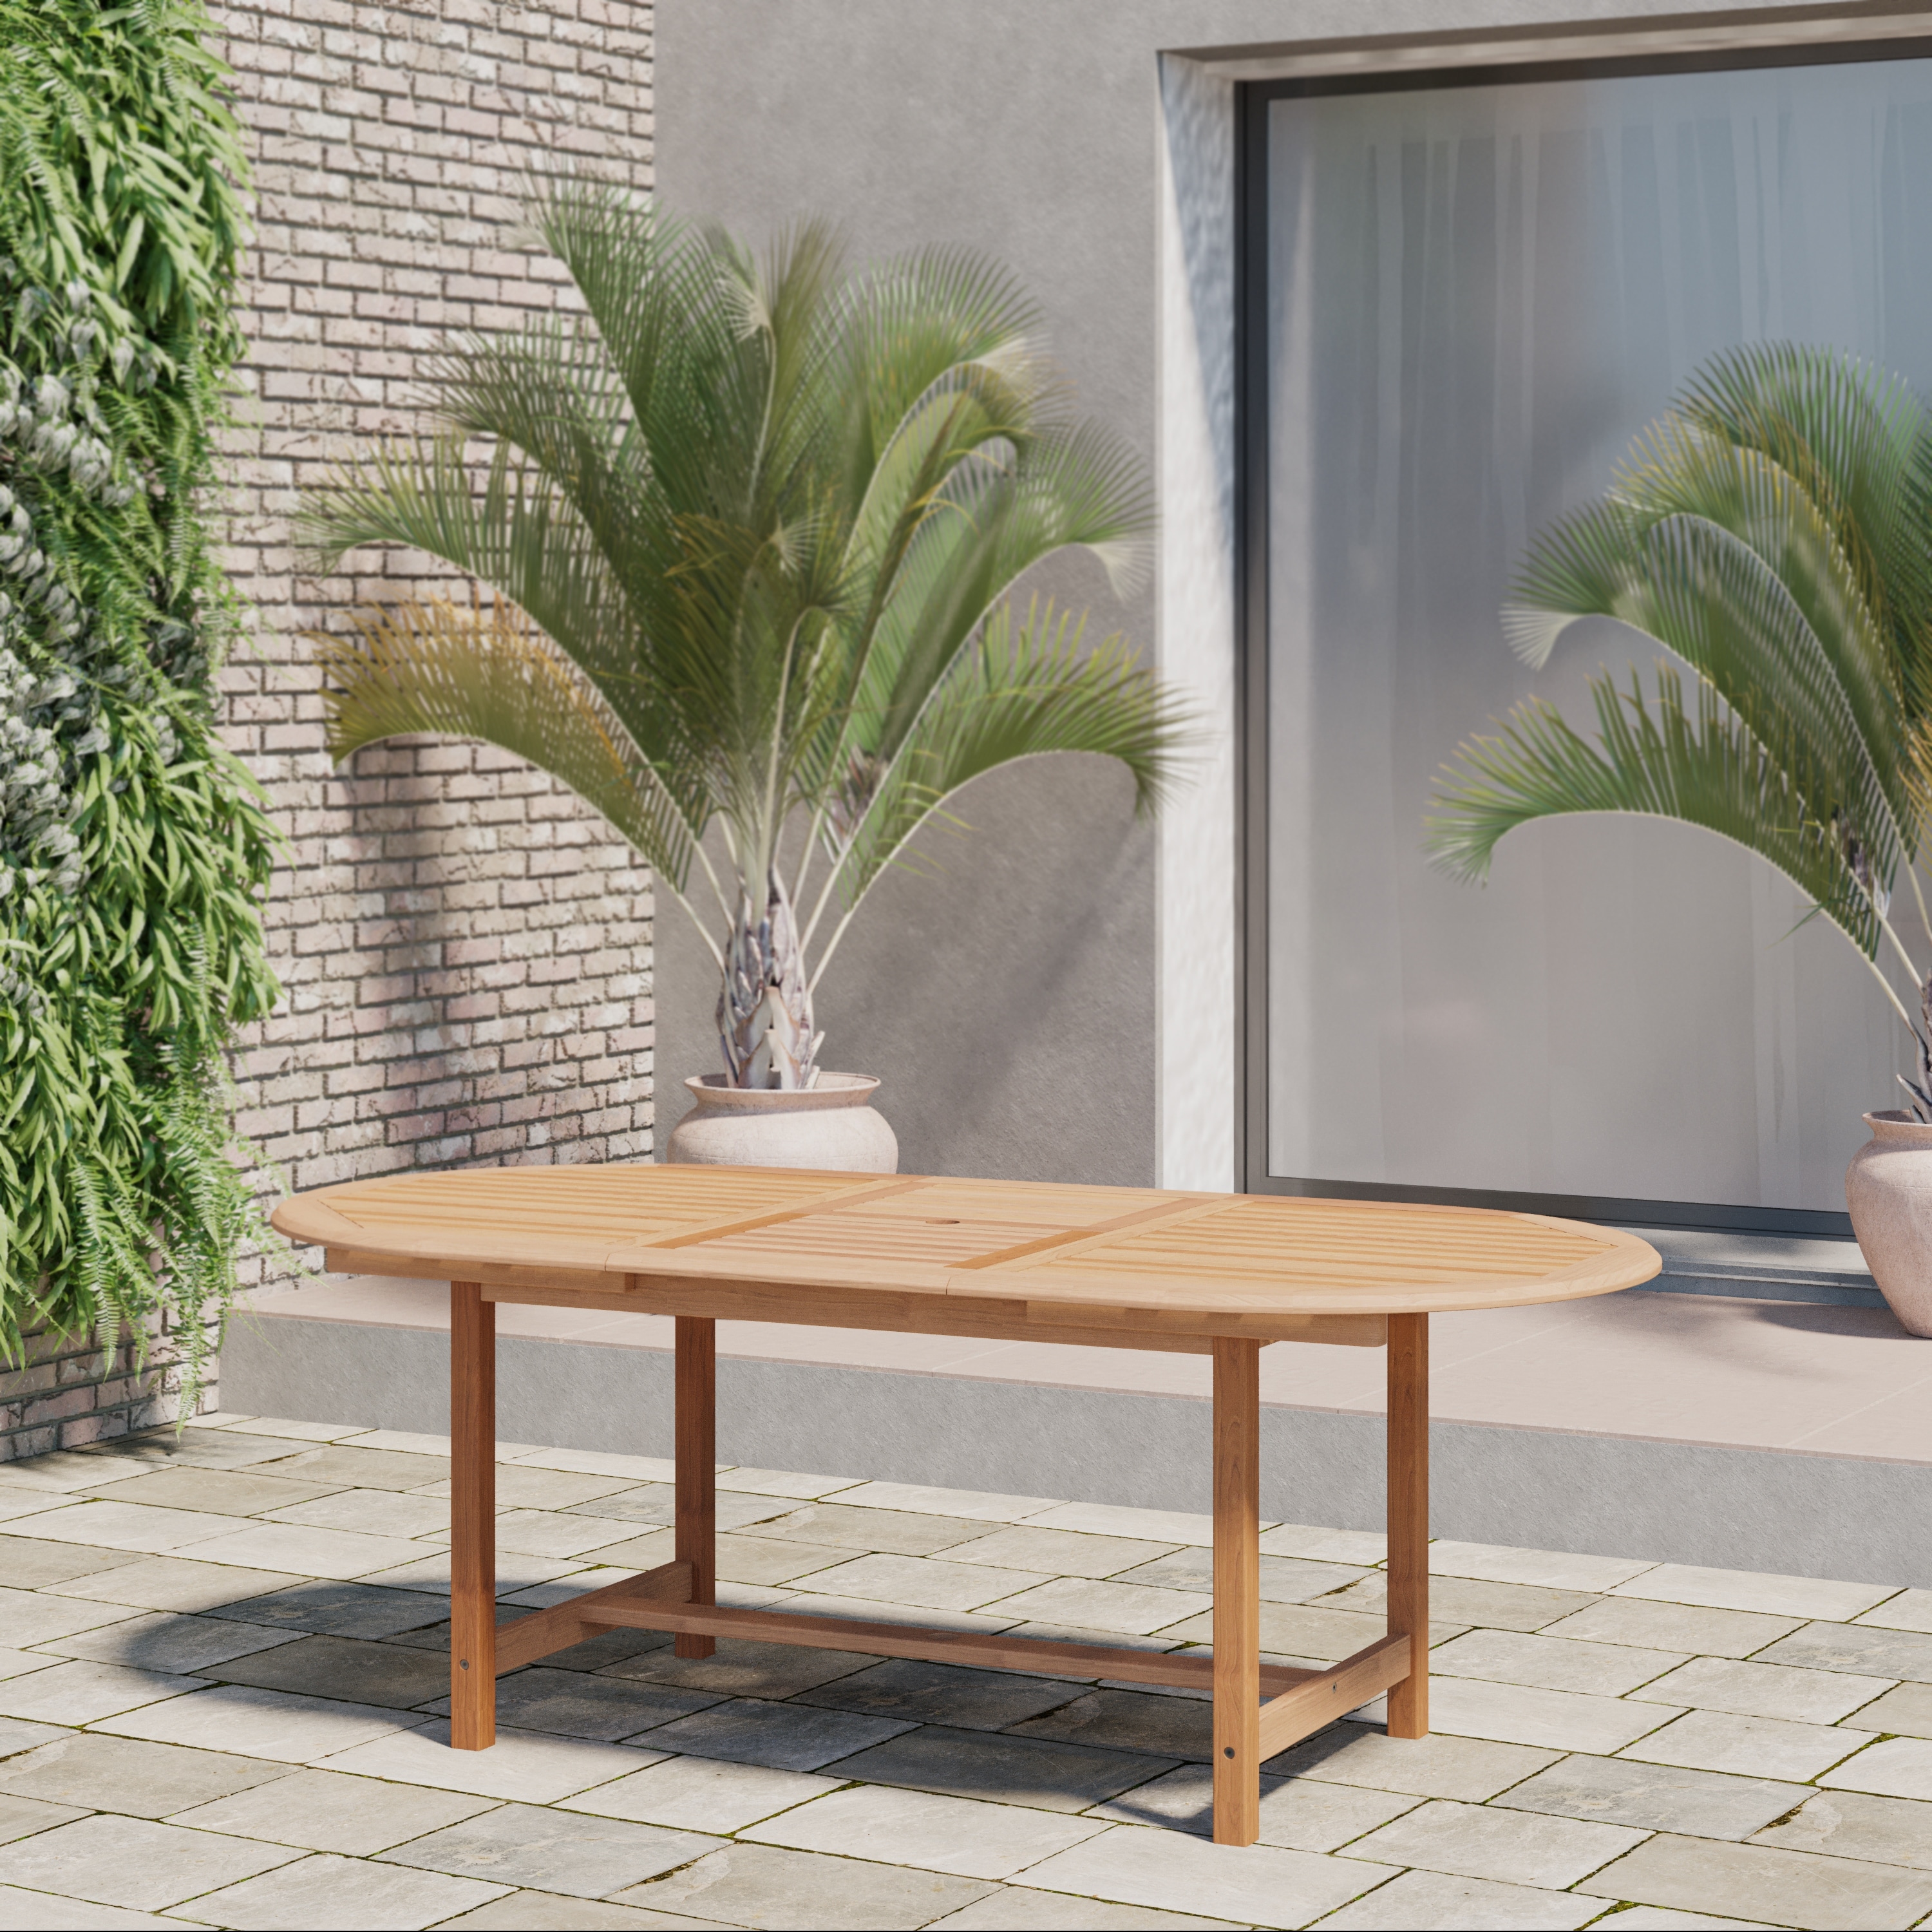 Amazonia Leble Outdoor Solid Teak Oval Patio Dining Table